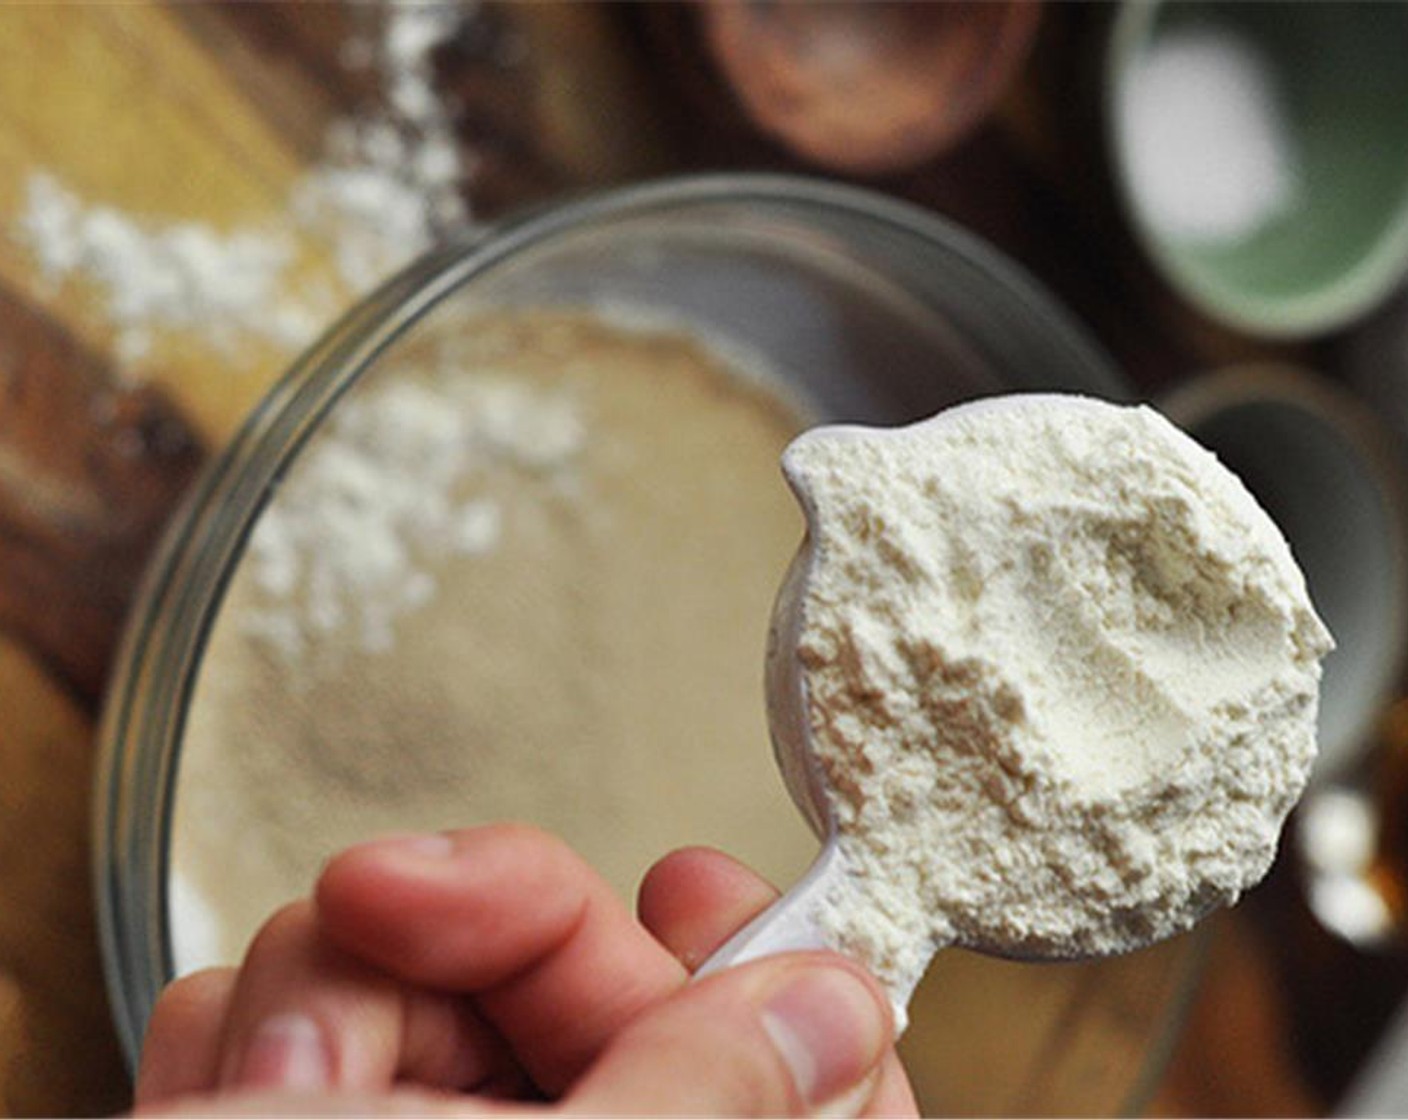 step 1 In a medium bowl, whisk together Active Dry Yeast (2 Tbsp) and 3/4 of the Milk (1 cup). Allow the active dry yeast to slightly dissolve. Add 3/4 cup of Bread Flour (2 cups) and whisk together until a smooth batter is formed.